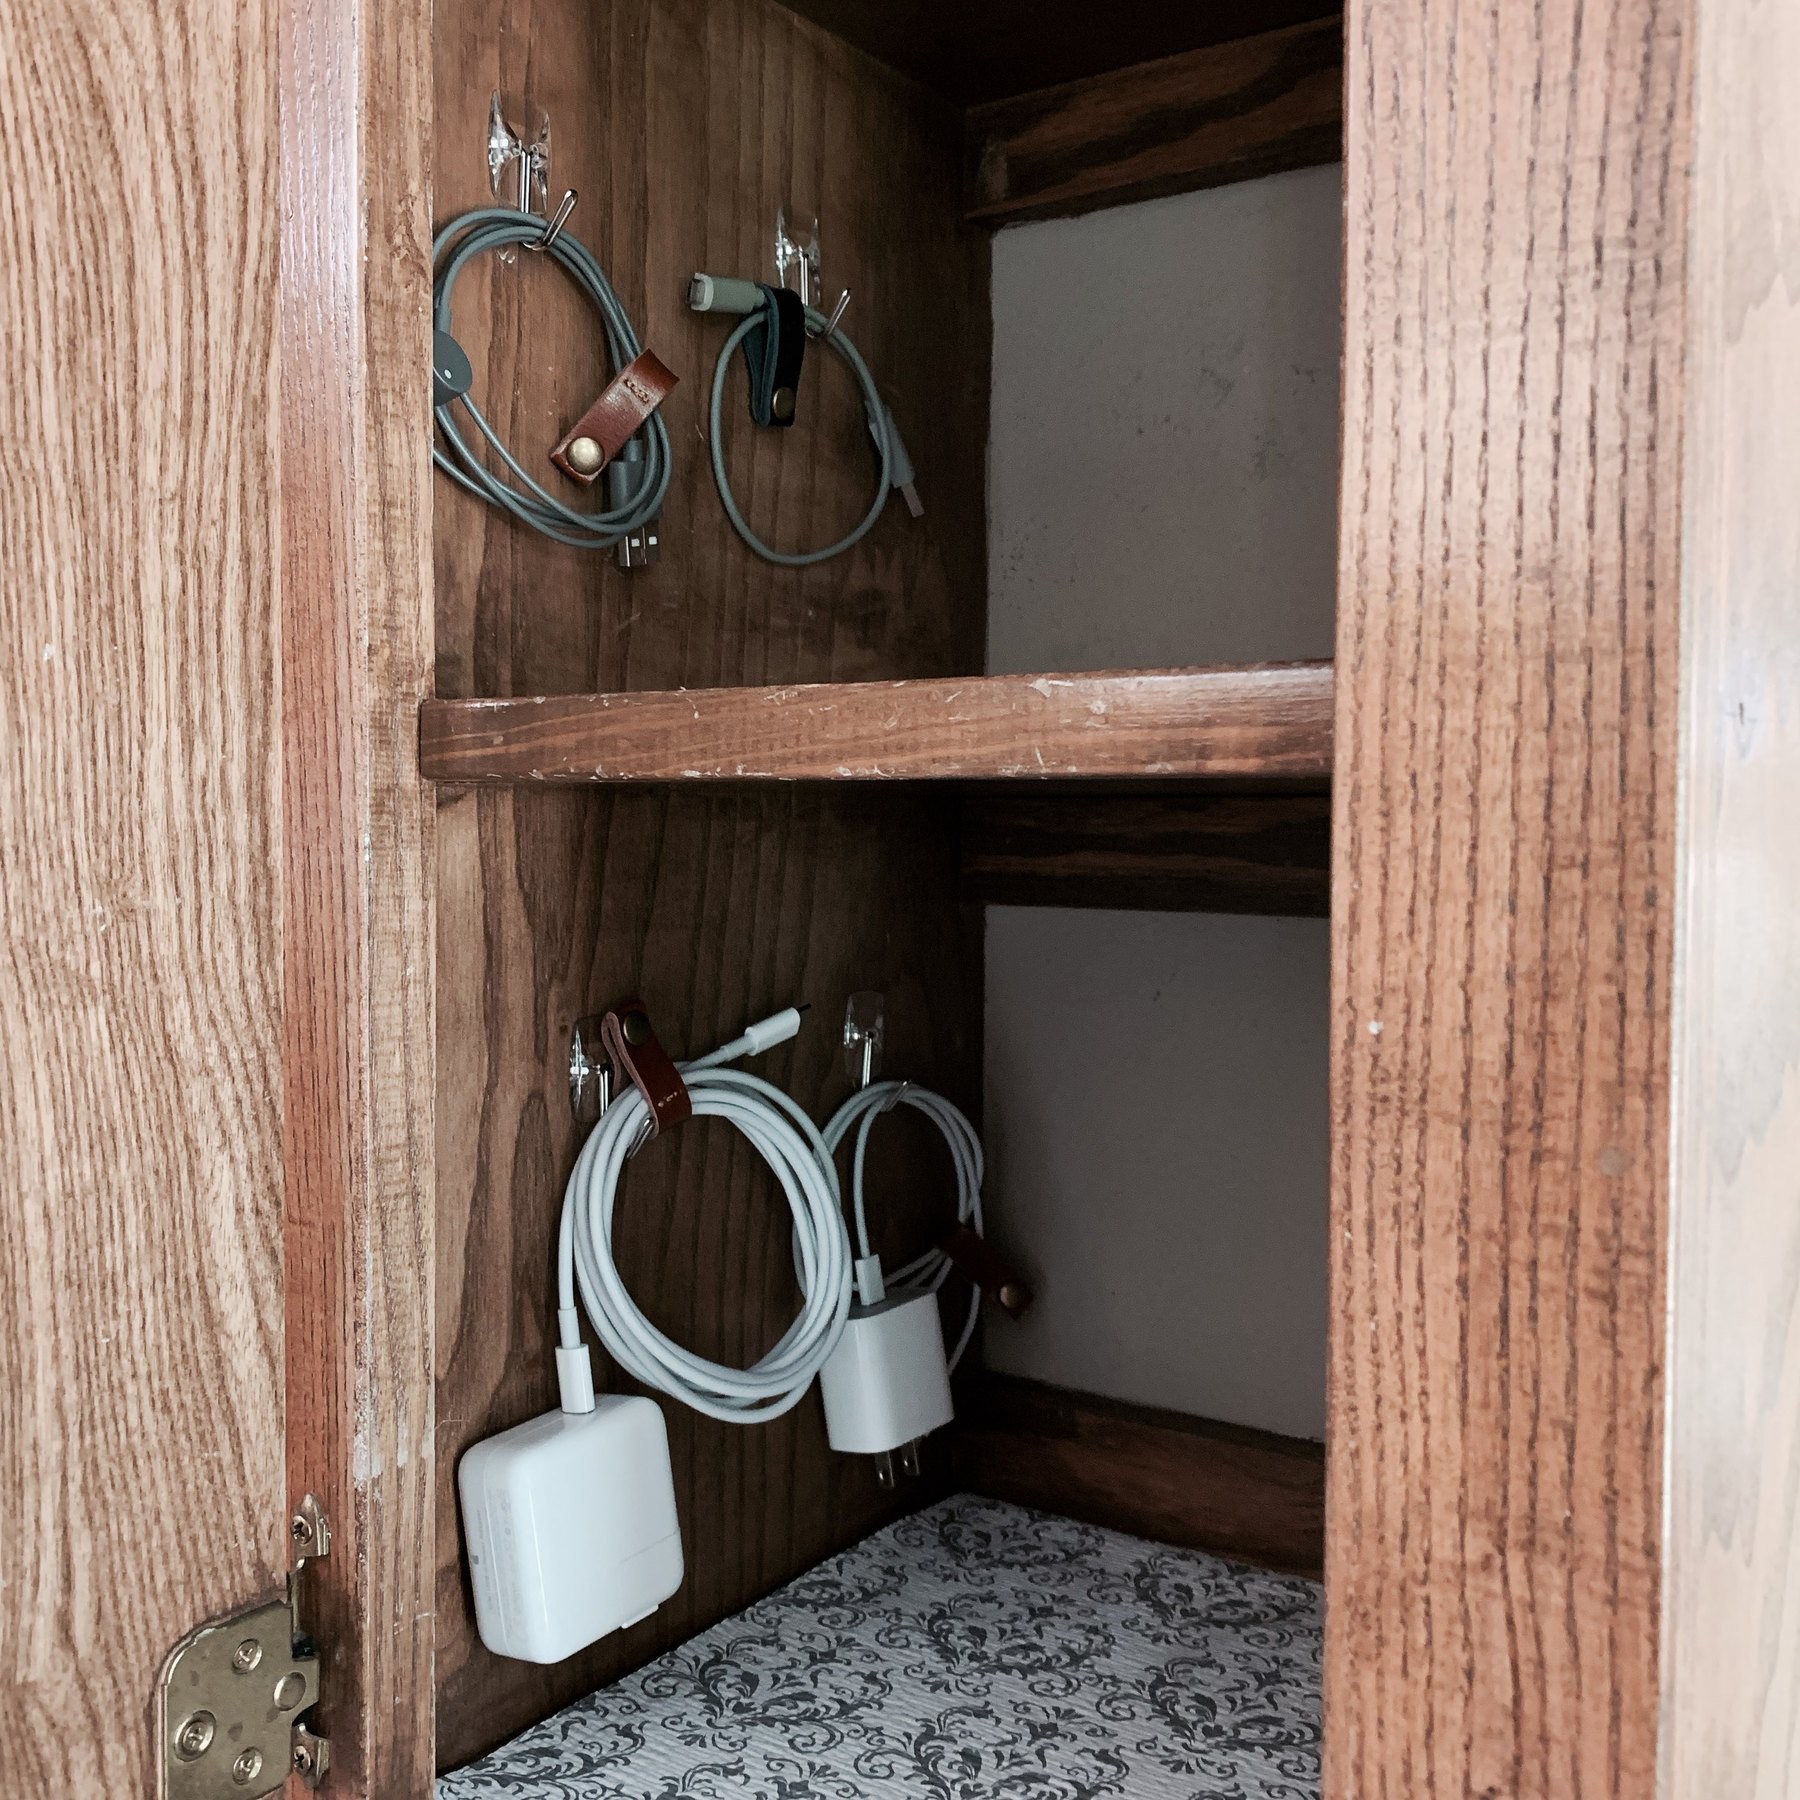 Cables neatly hung in a cabinet